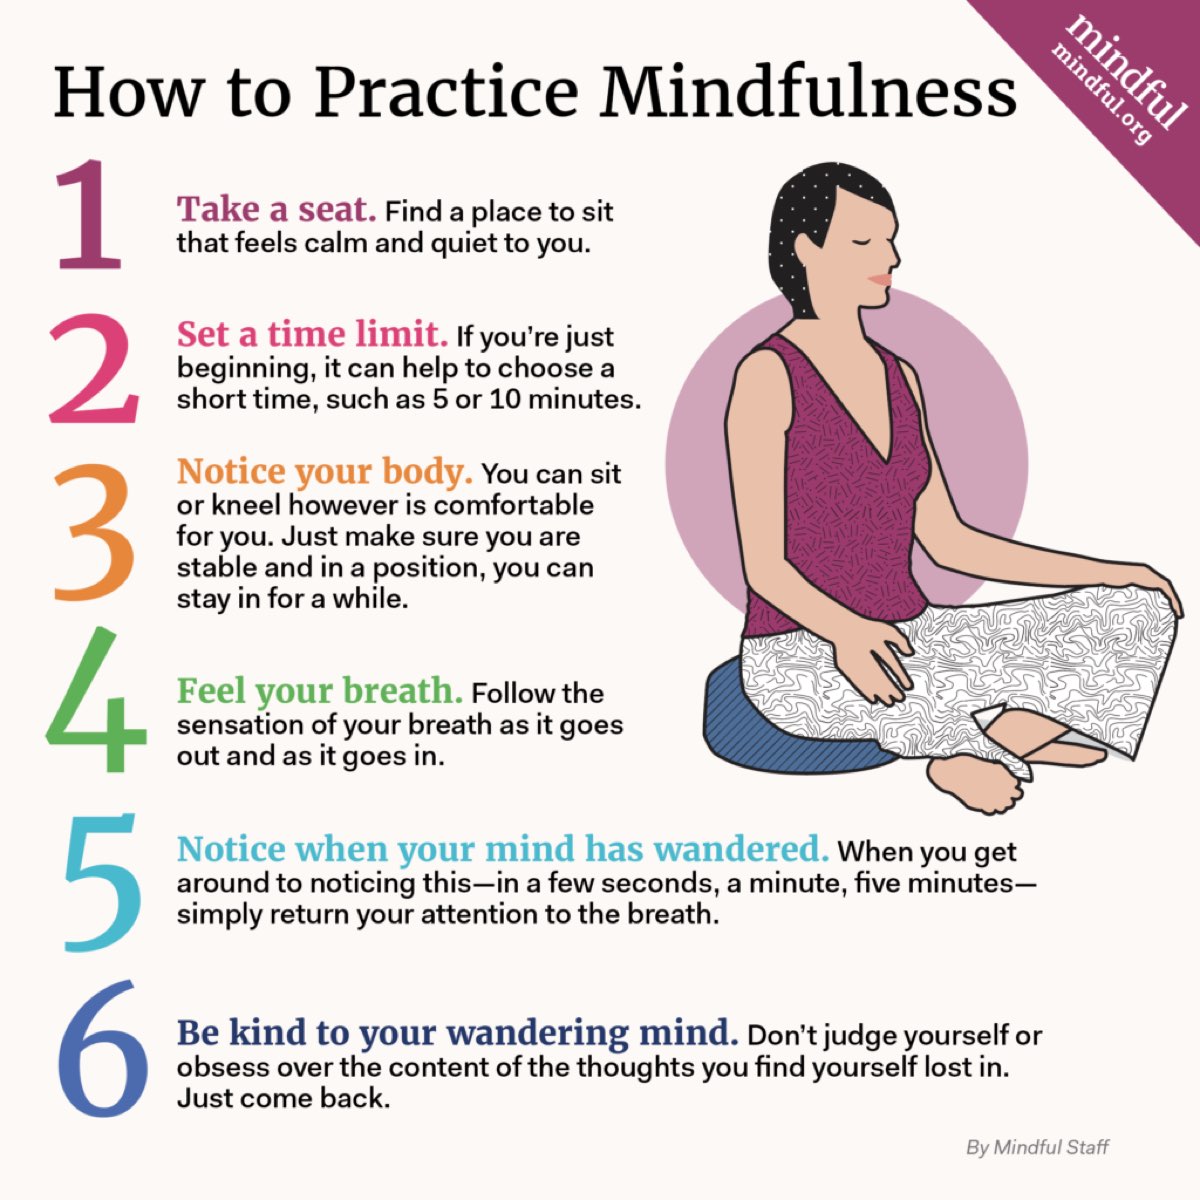 Less stress, clearer thoughts with mindfulness meditation